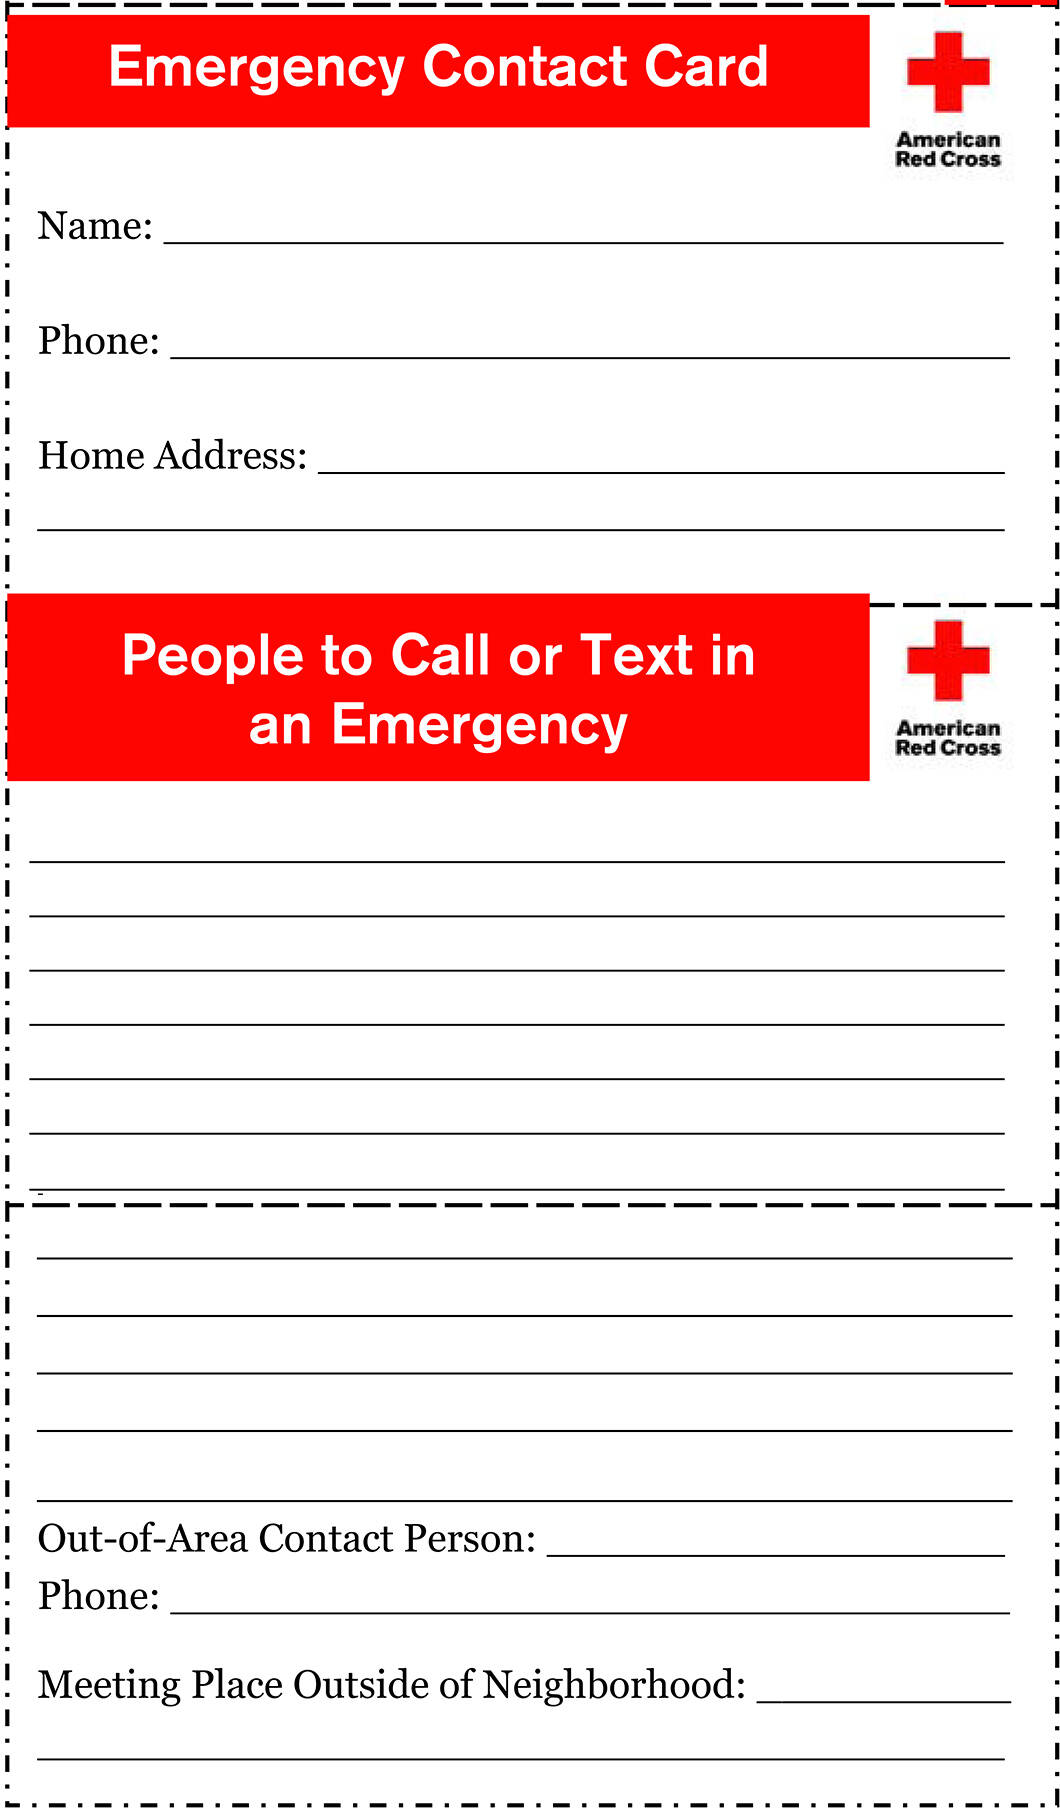 Each week, VashonBePrepared publishes one simple, easy step you can take towards making your household more ready for an emergency. This week, print a pocket-sized emergency contact card for each member of your household. Everyone in the household will have what they need to get back together if an earthquake, storm, or other emergency separates them. It includes your designated out-of-area contact who can be your reunion facilitator and your household’s agreed-upon local meet-up location. Download the printable American Red Cross Emergency Contact Card at bit.ly/ARCcontactCard. (Courtesy Graphic)